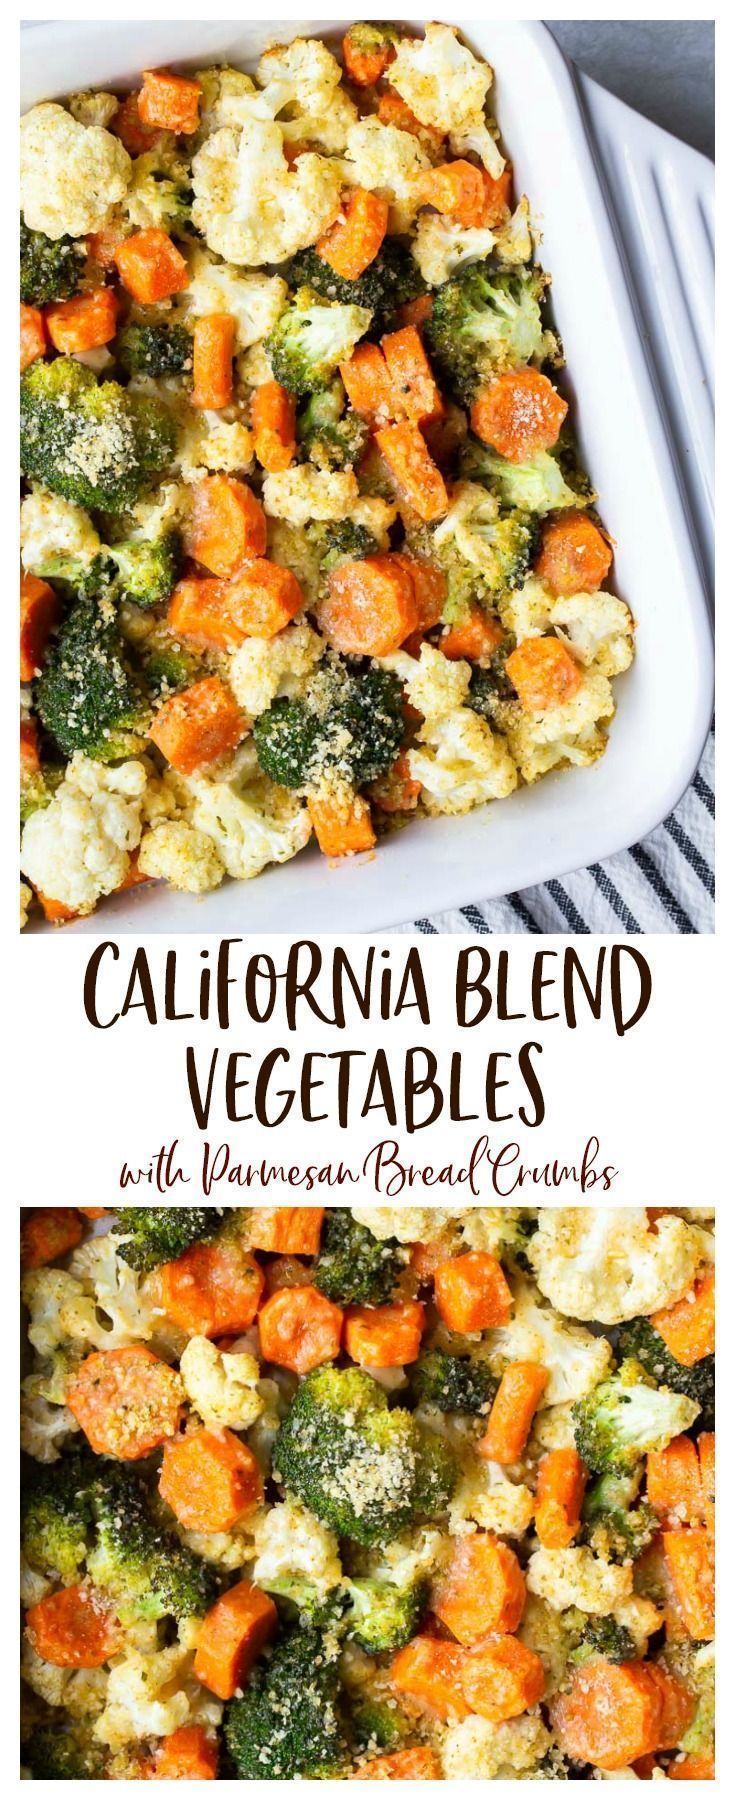 California Blend Vegetables with Parmesan Bread Crumbs - California Blend Vegetables with Parmesan Bread Crumbs -   21 thanksgiving recipes side dishes easy ideas